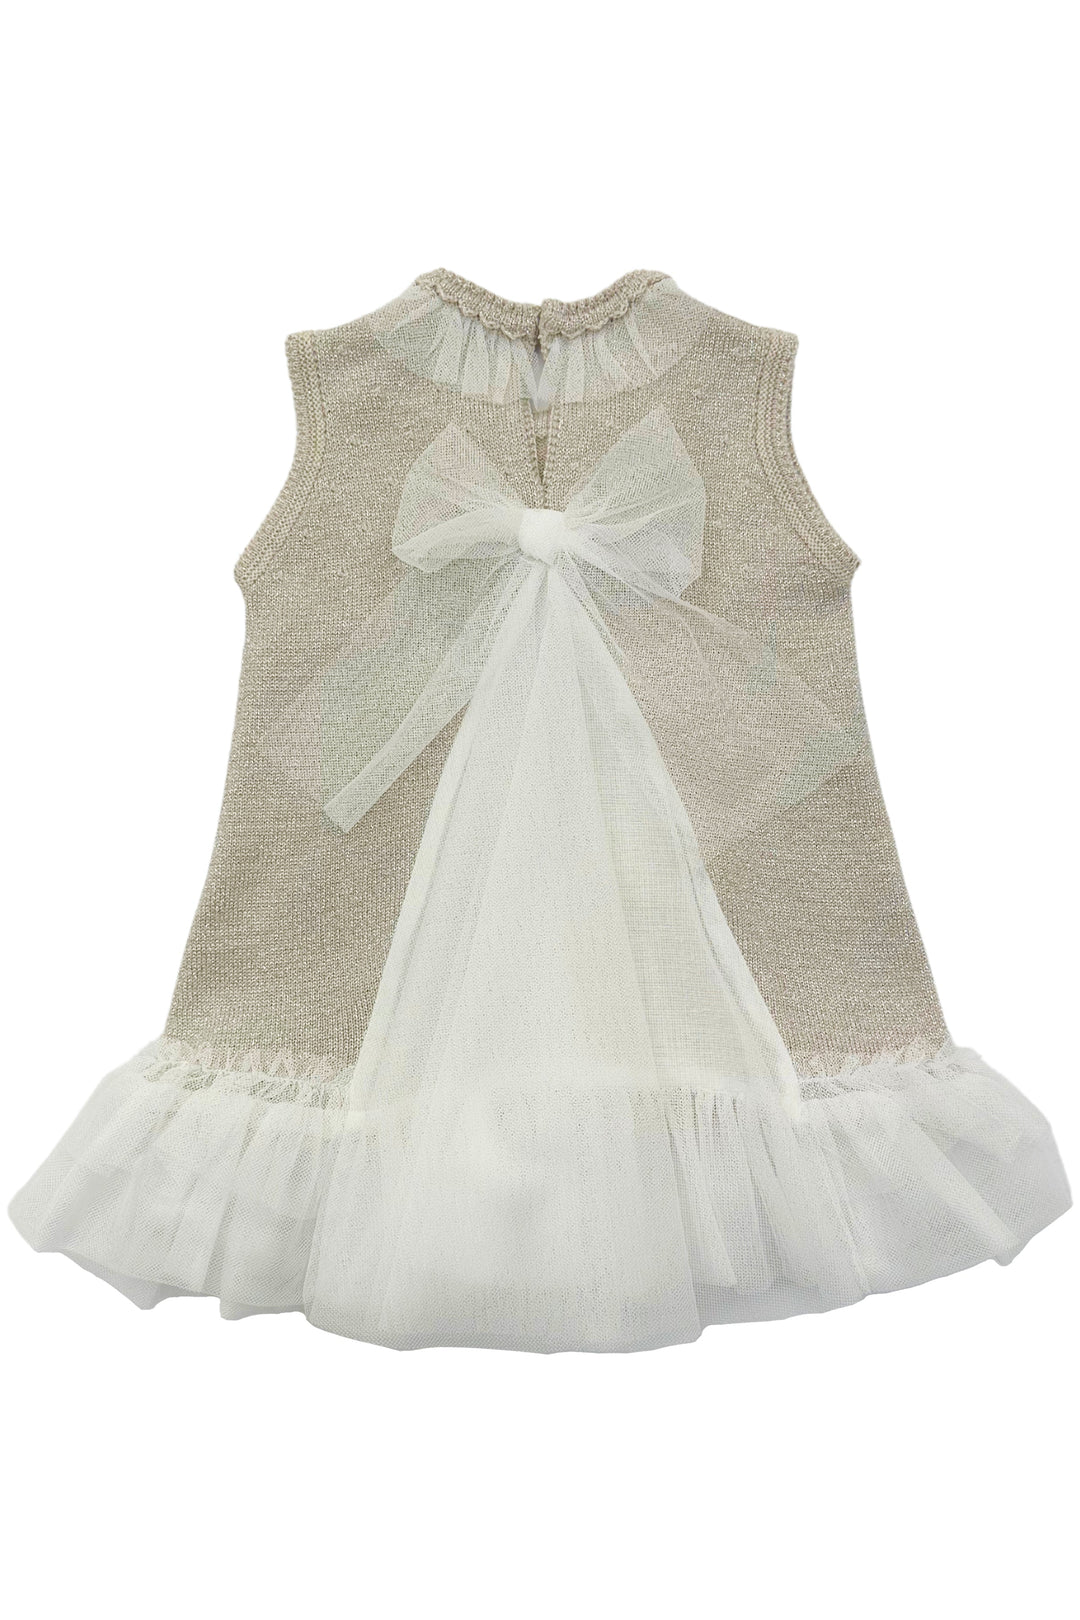 Granlei "Grace" Sparkly Stone Knit Tulle Bow Dress | Millie and John